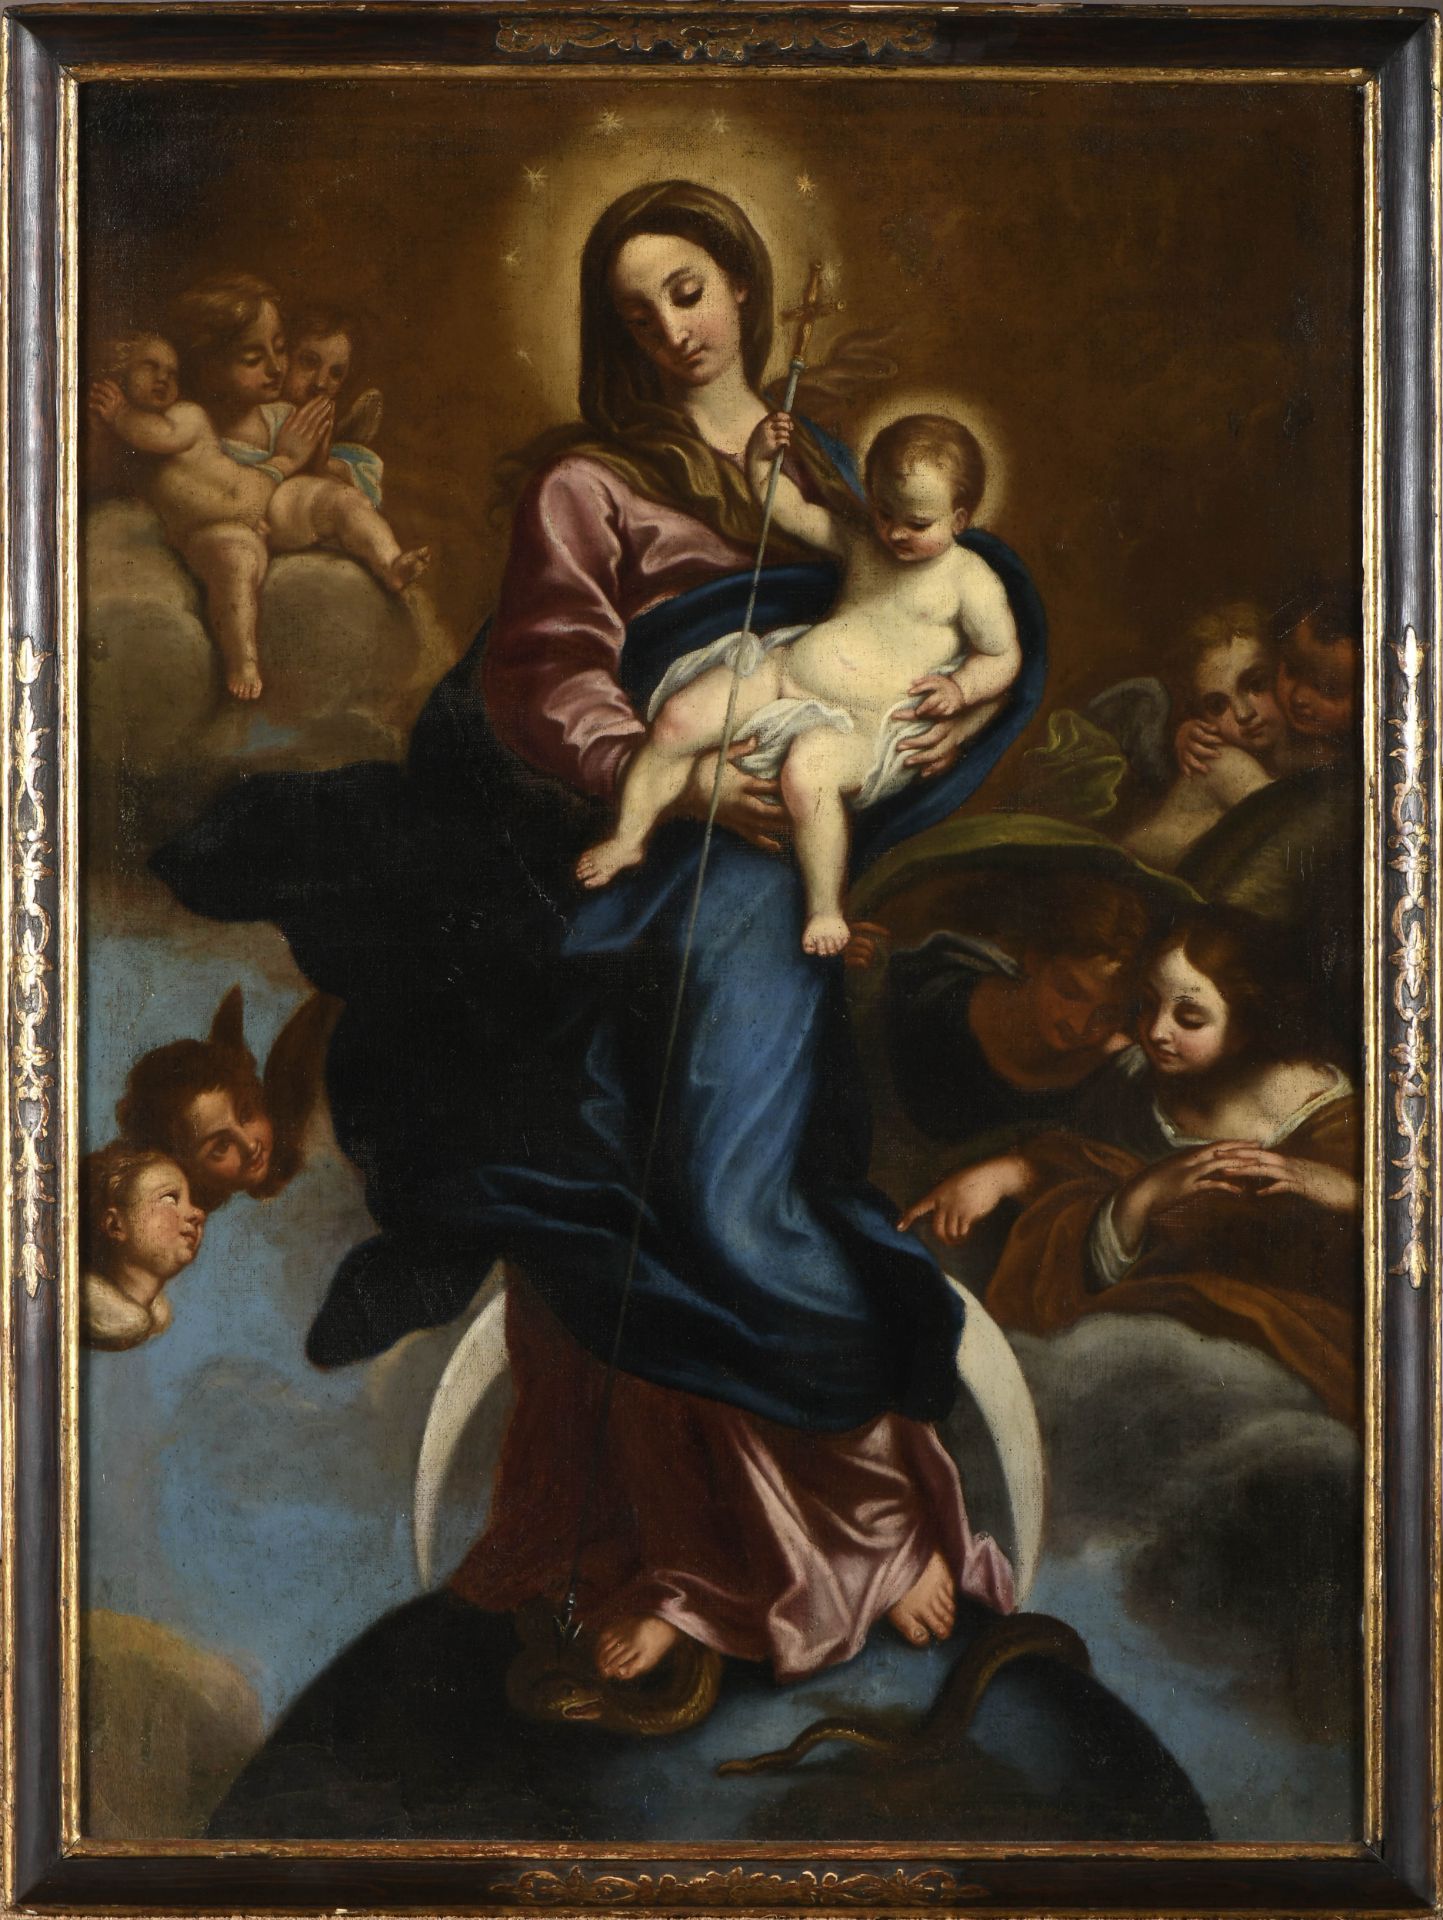 Our Lady with the Child Jesus surrounded by angels